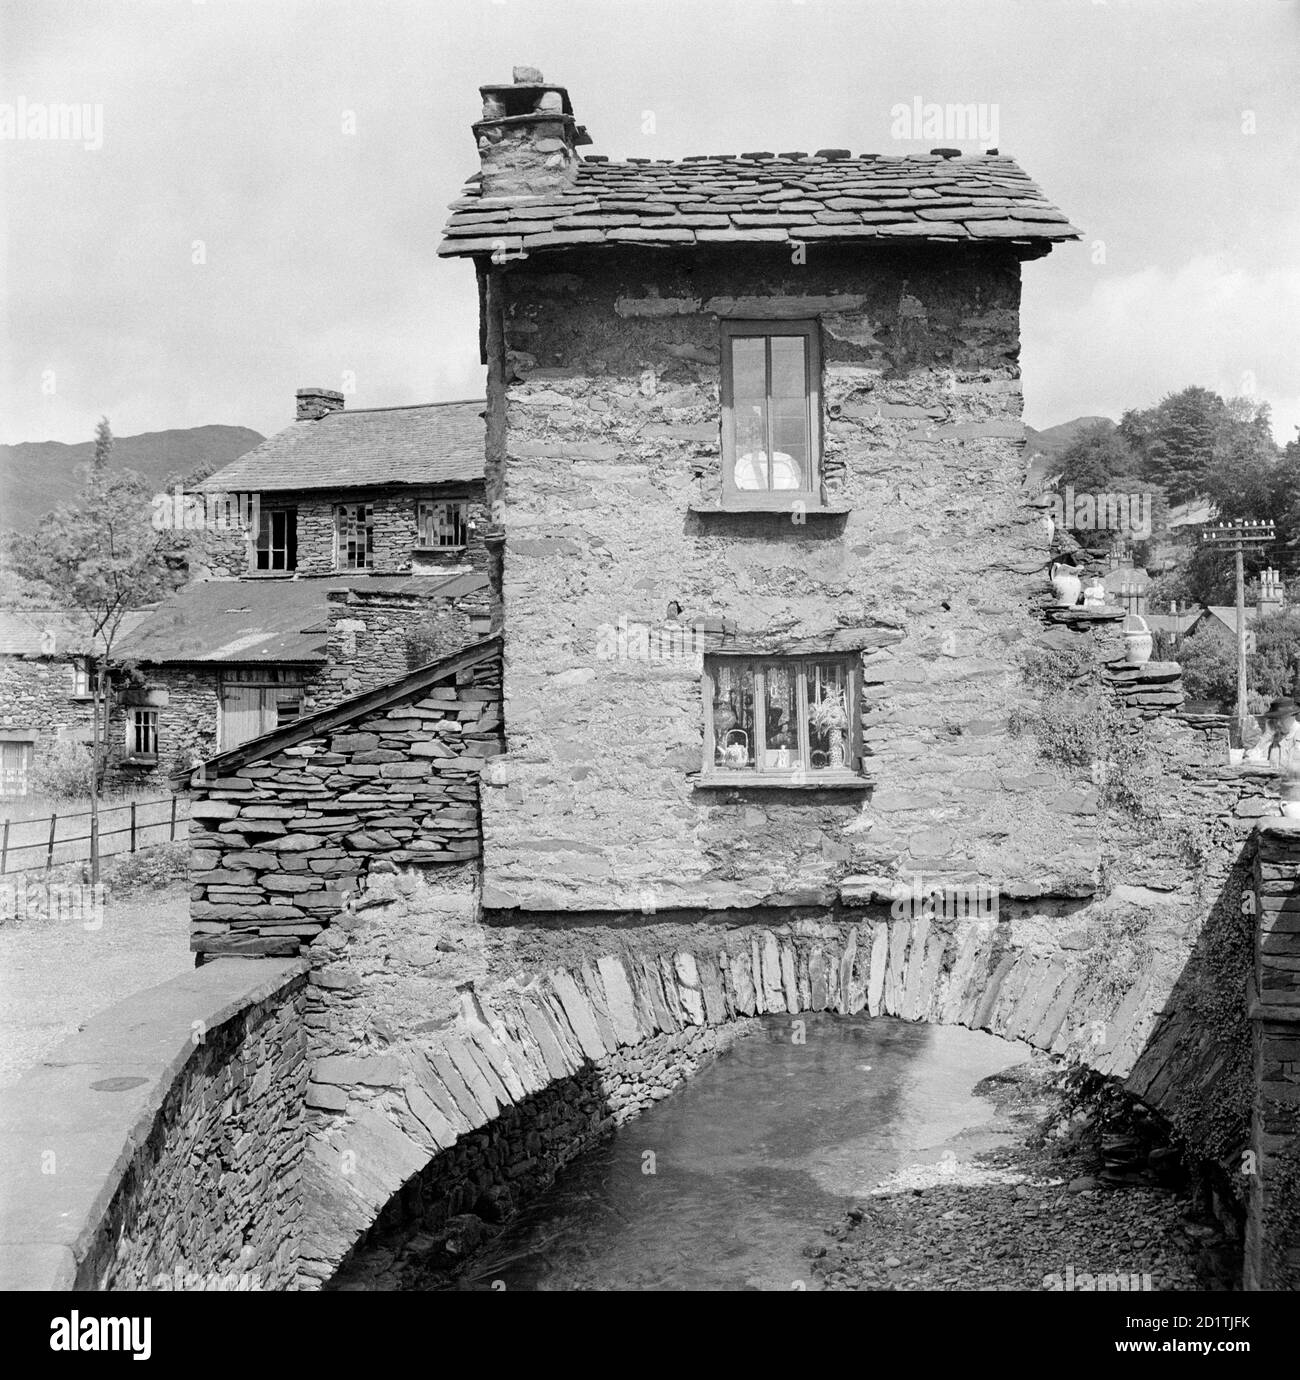 BRIDGE HOUSE, Ambleside, Cumbria. Bridge House was built over the Stock Ghyll to avoid land tax. Originally designed as an apple store, it was later used as a house, an information centre and now a shop for the National Trust. Photographed by Eric de Mare between 1945 and 1980. Stock Photo